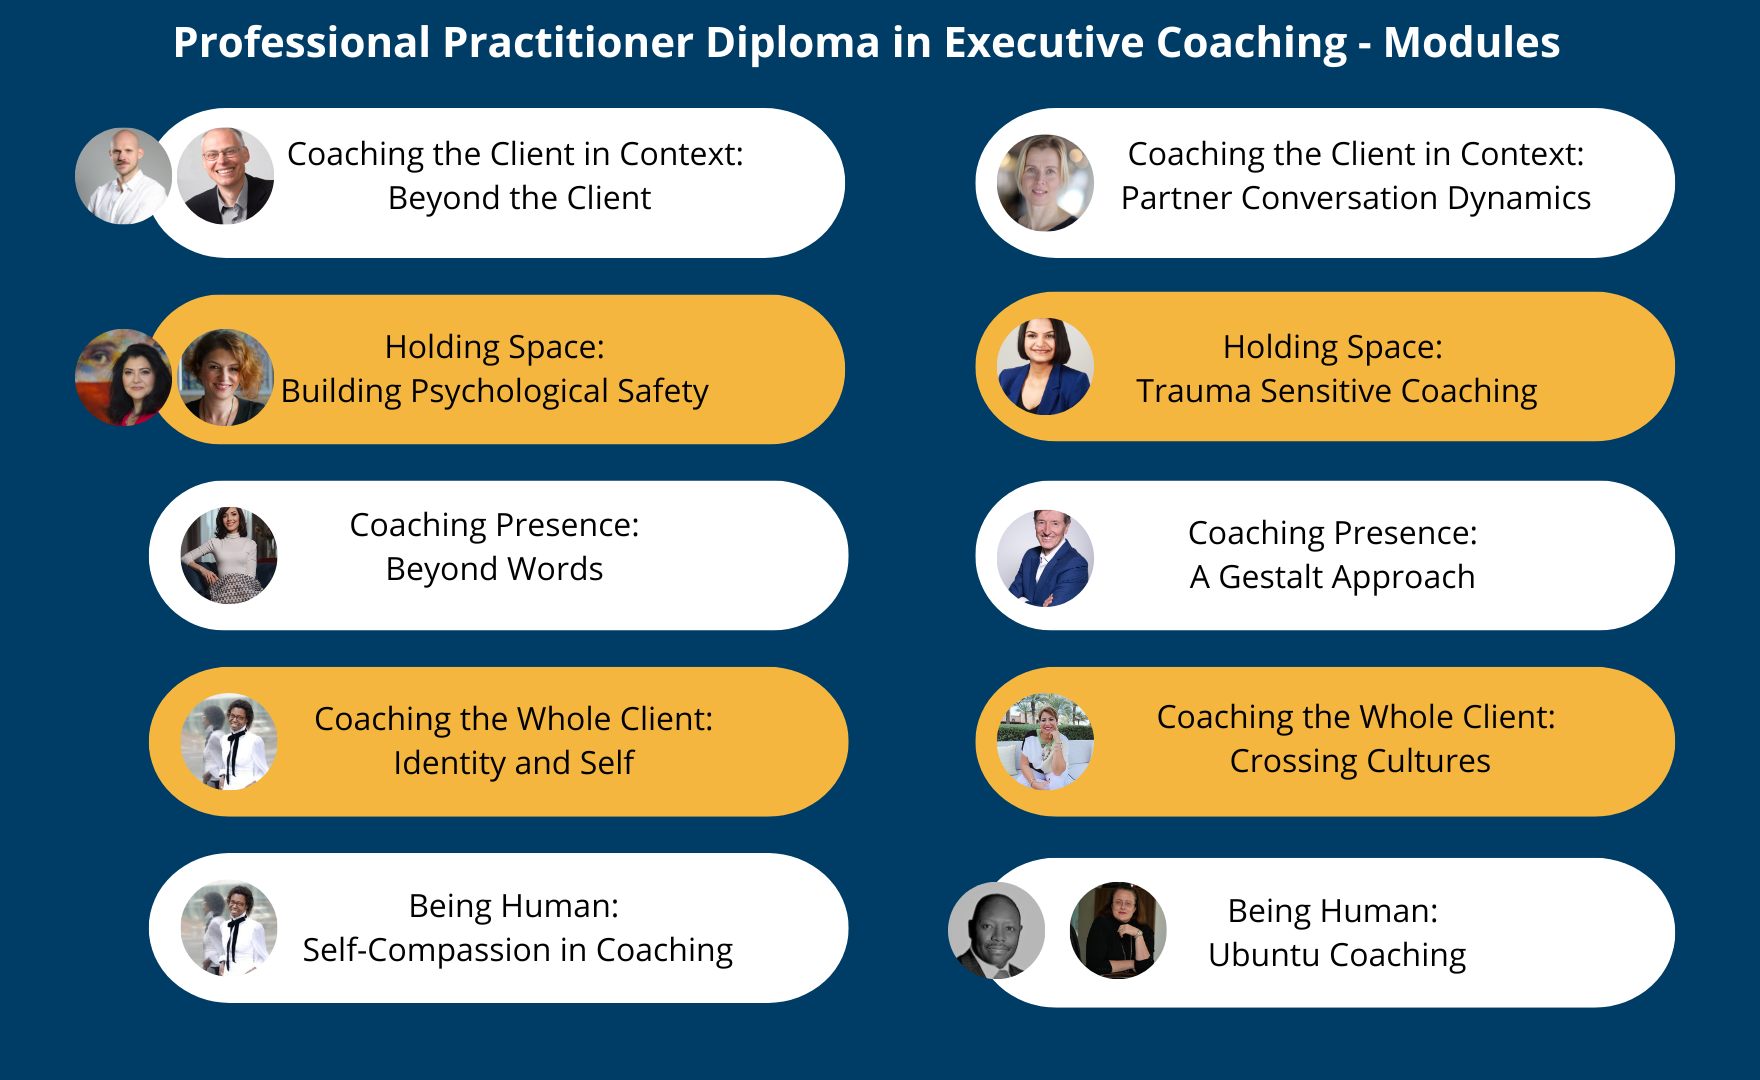 Professional Practitioner Diploma - modules